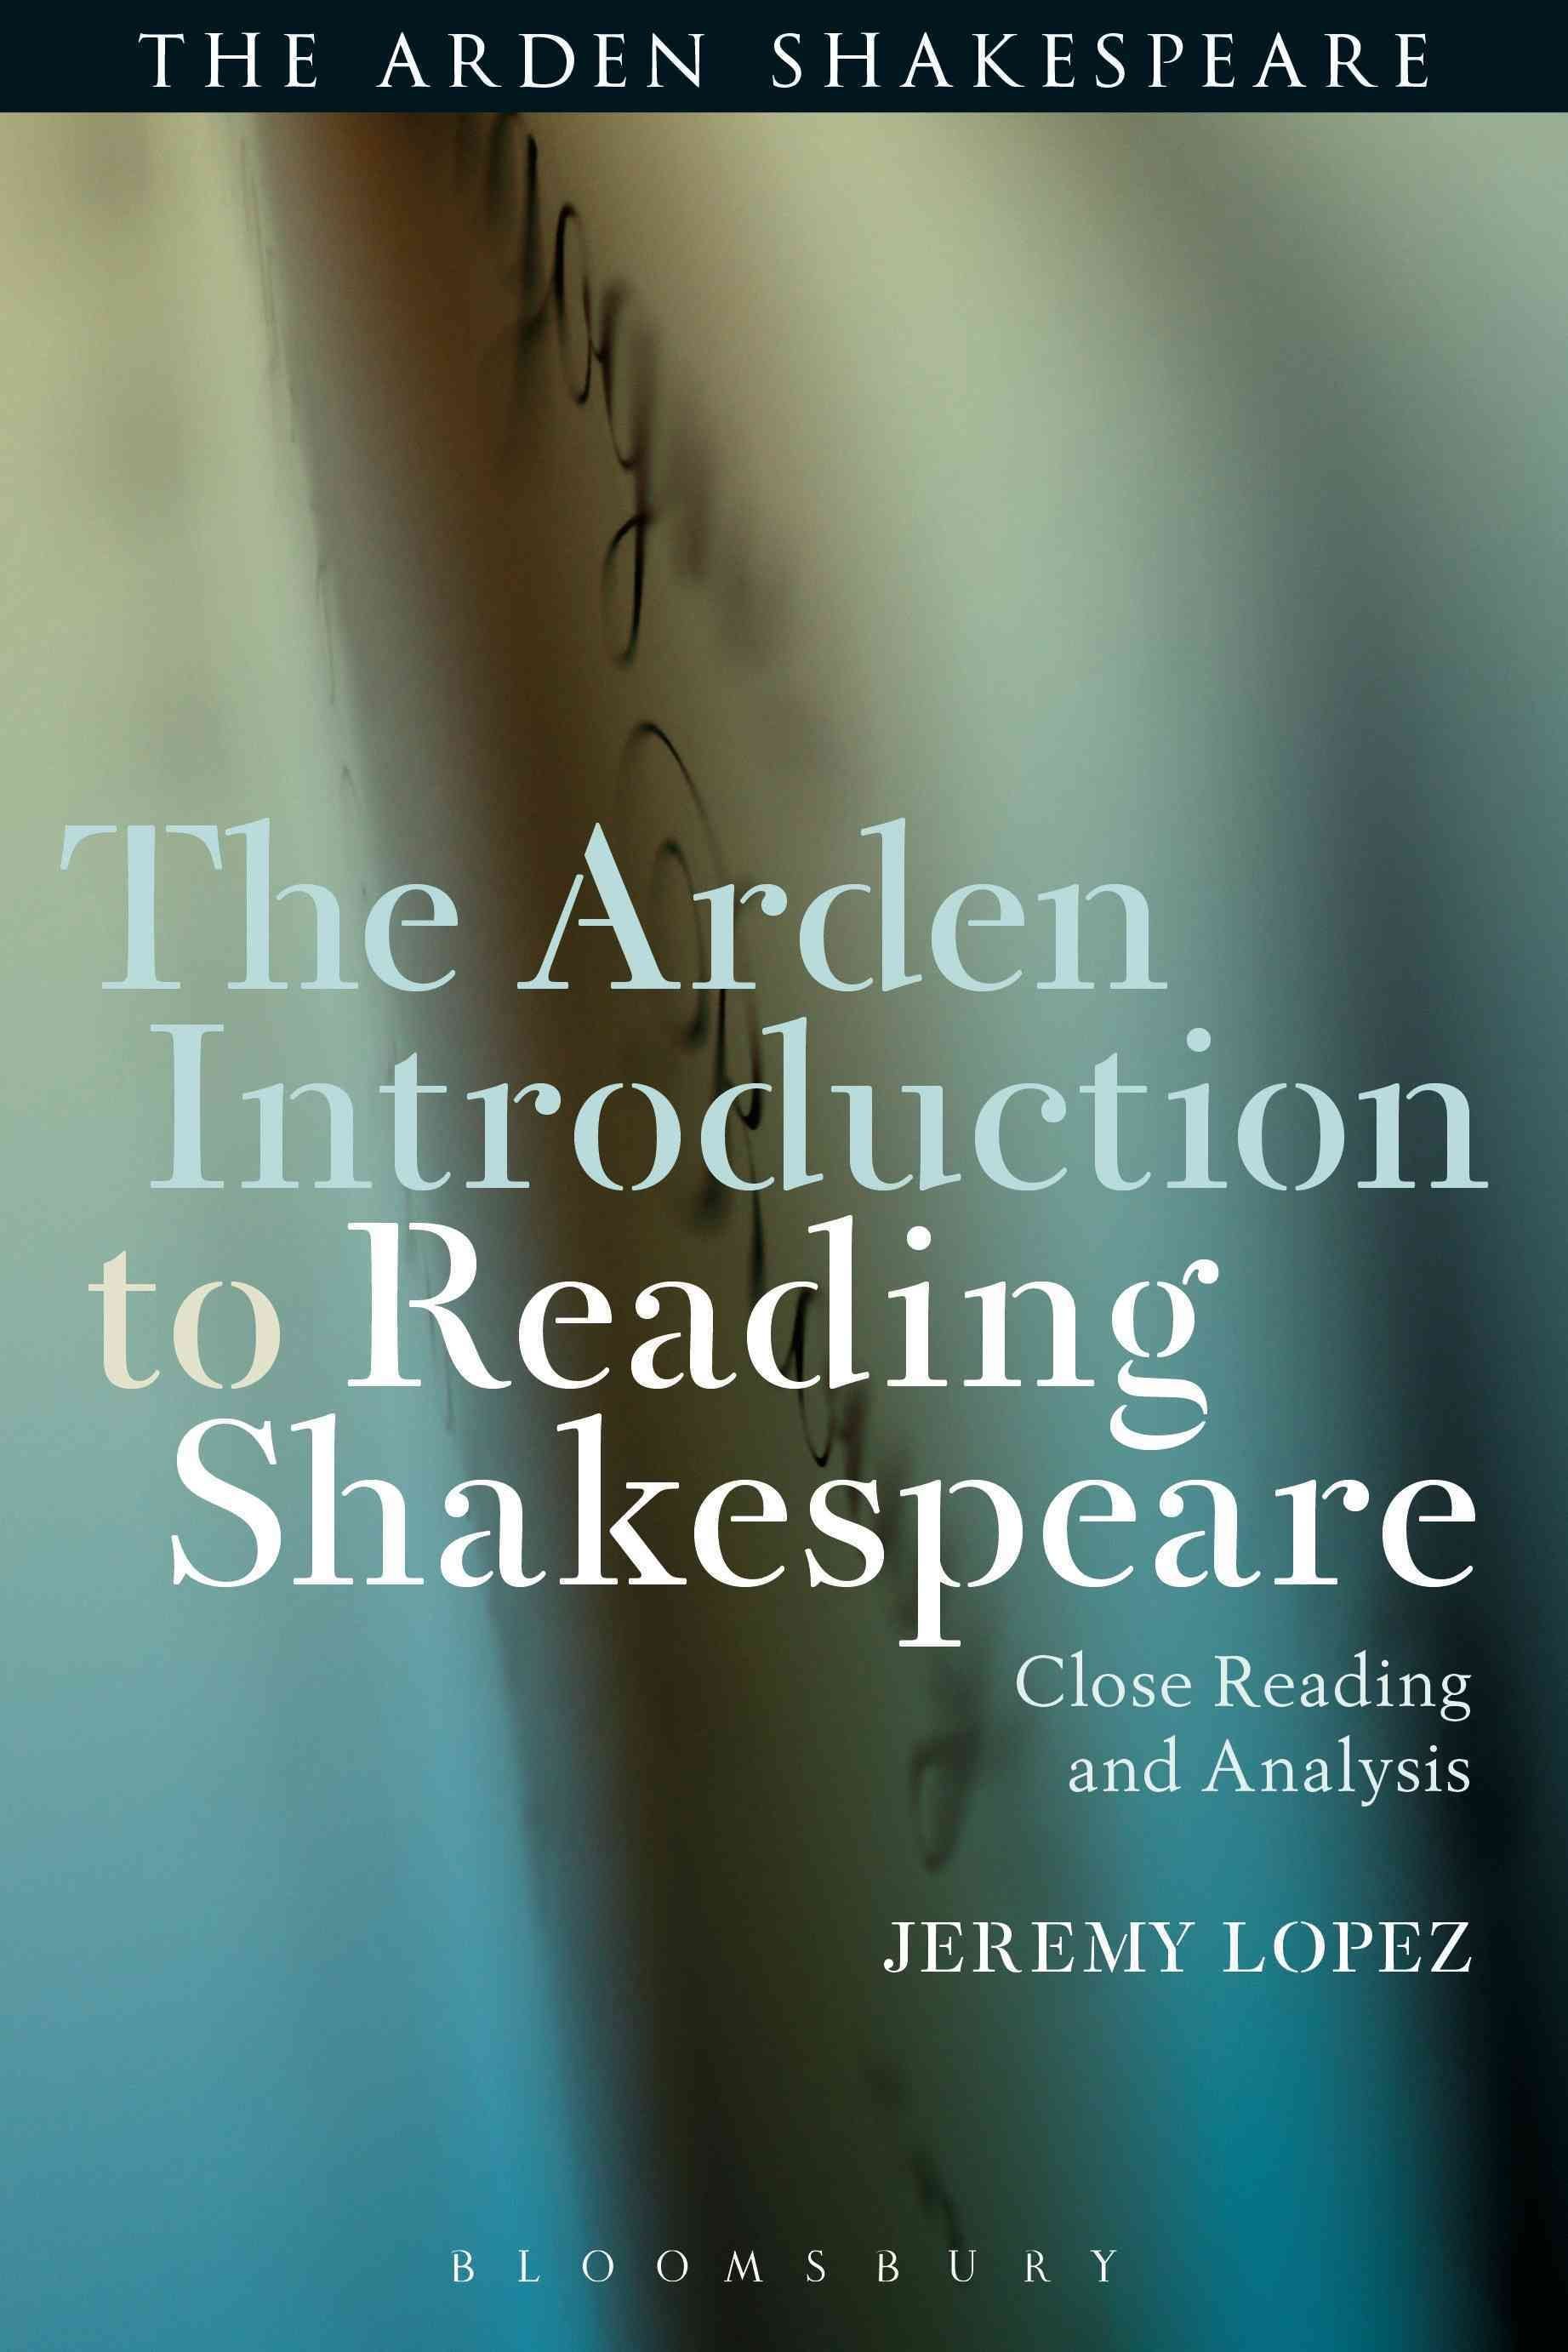 Lopez　Free　Buy　Delivery　Shakespeare　Arden　Reading　Introduction　to　With　by　Jeremy